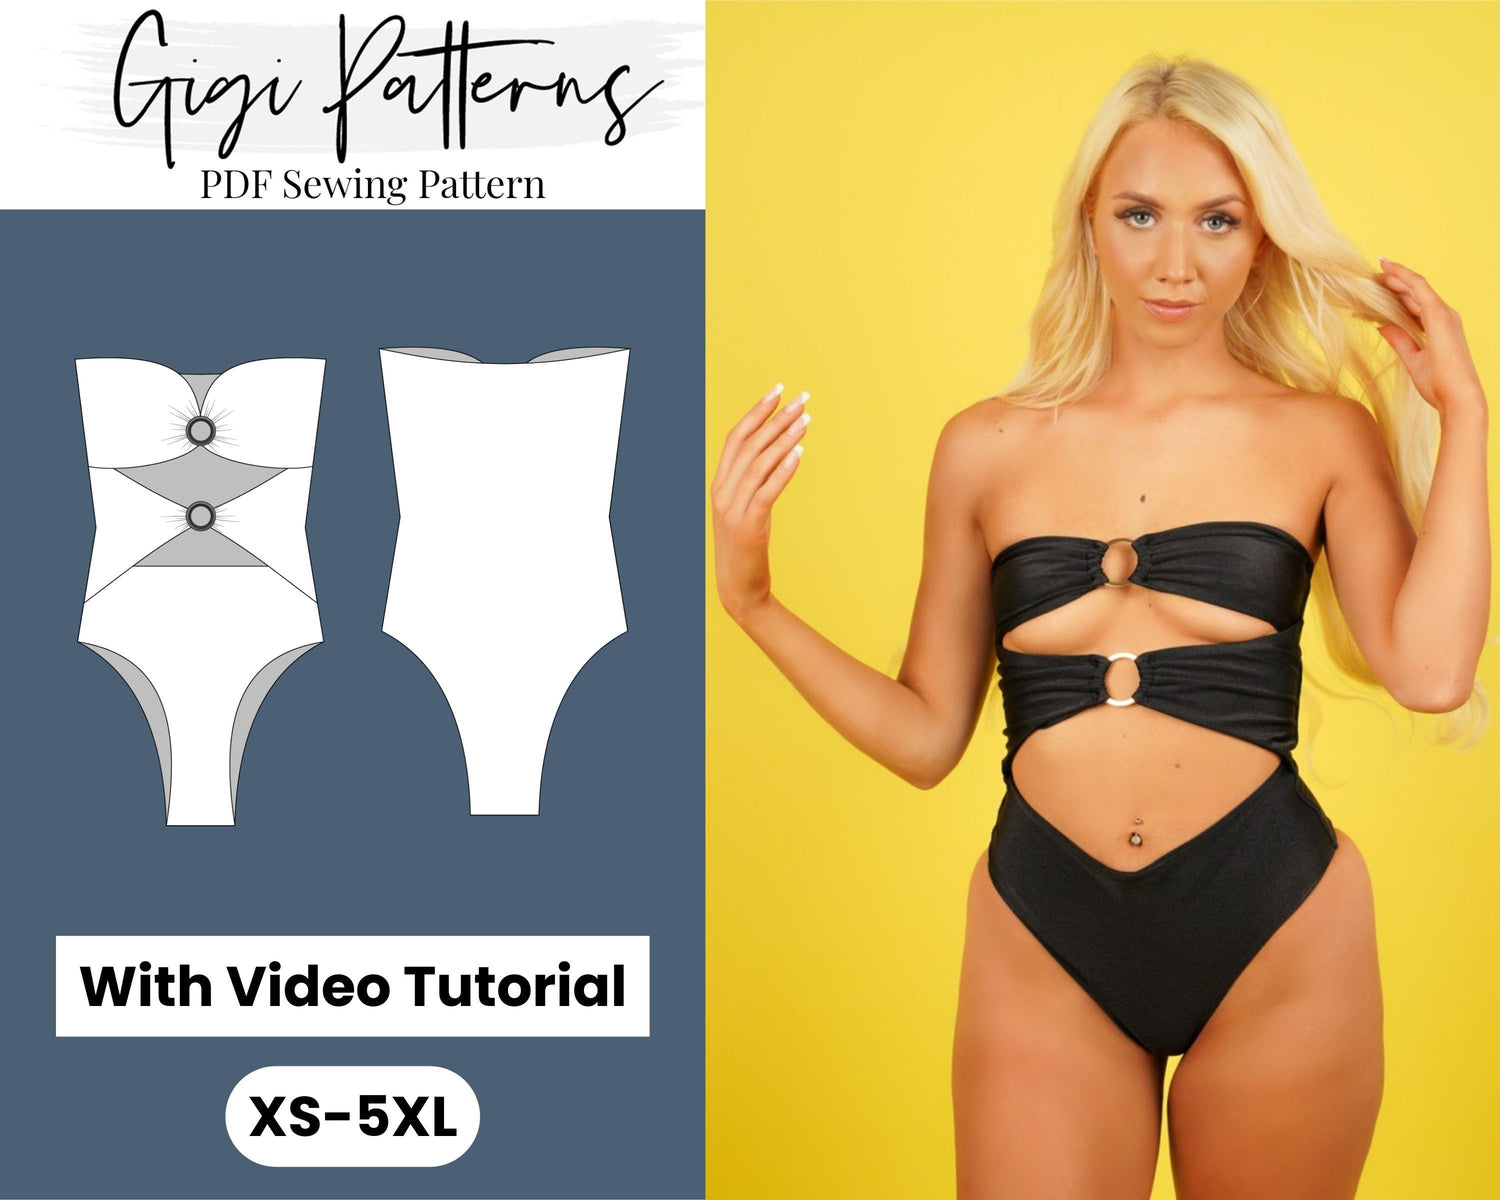 Cygne Swimsuit, sizes 32-52 (cup B to G) , PDF sewing pattern